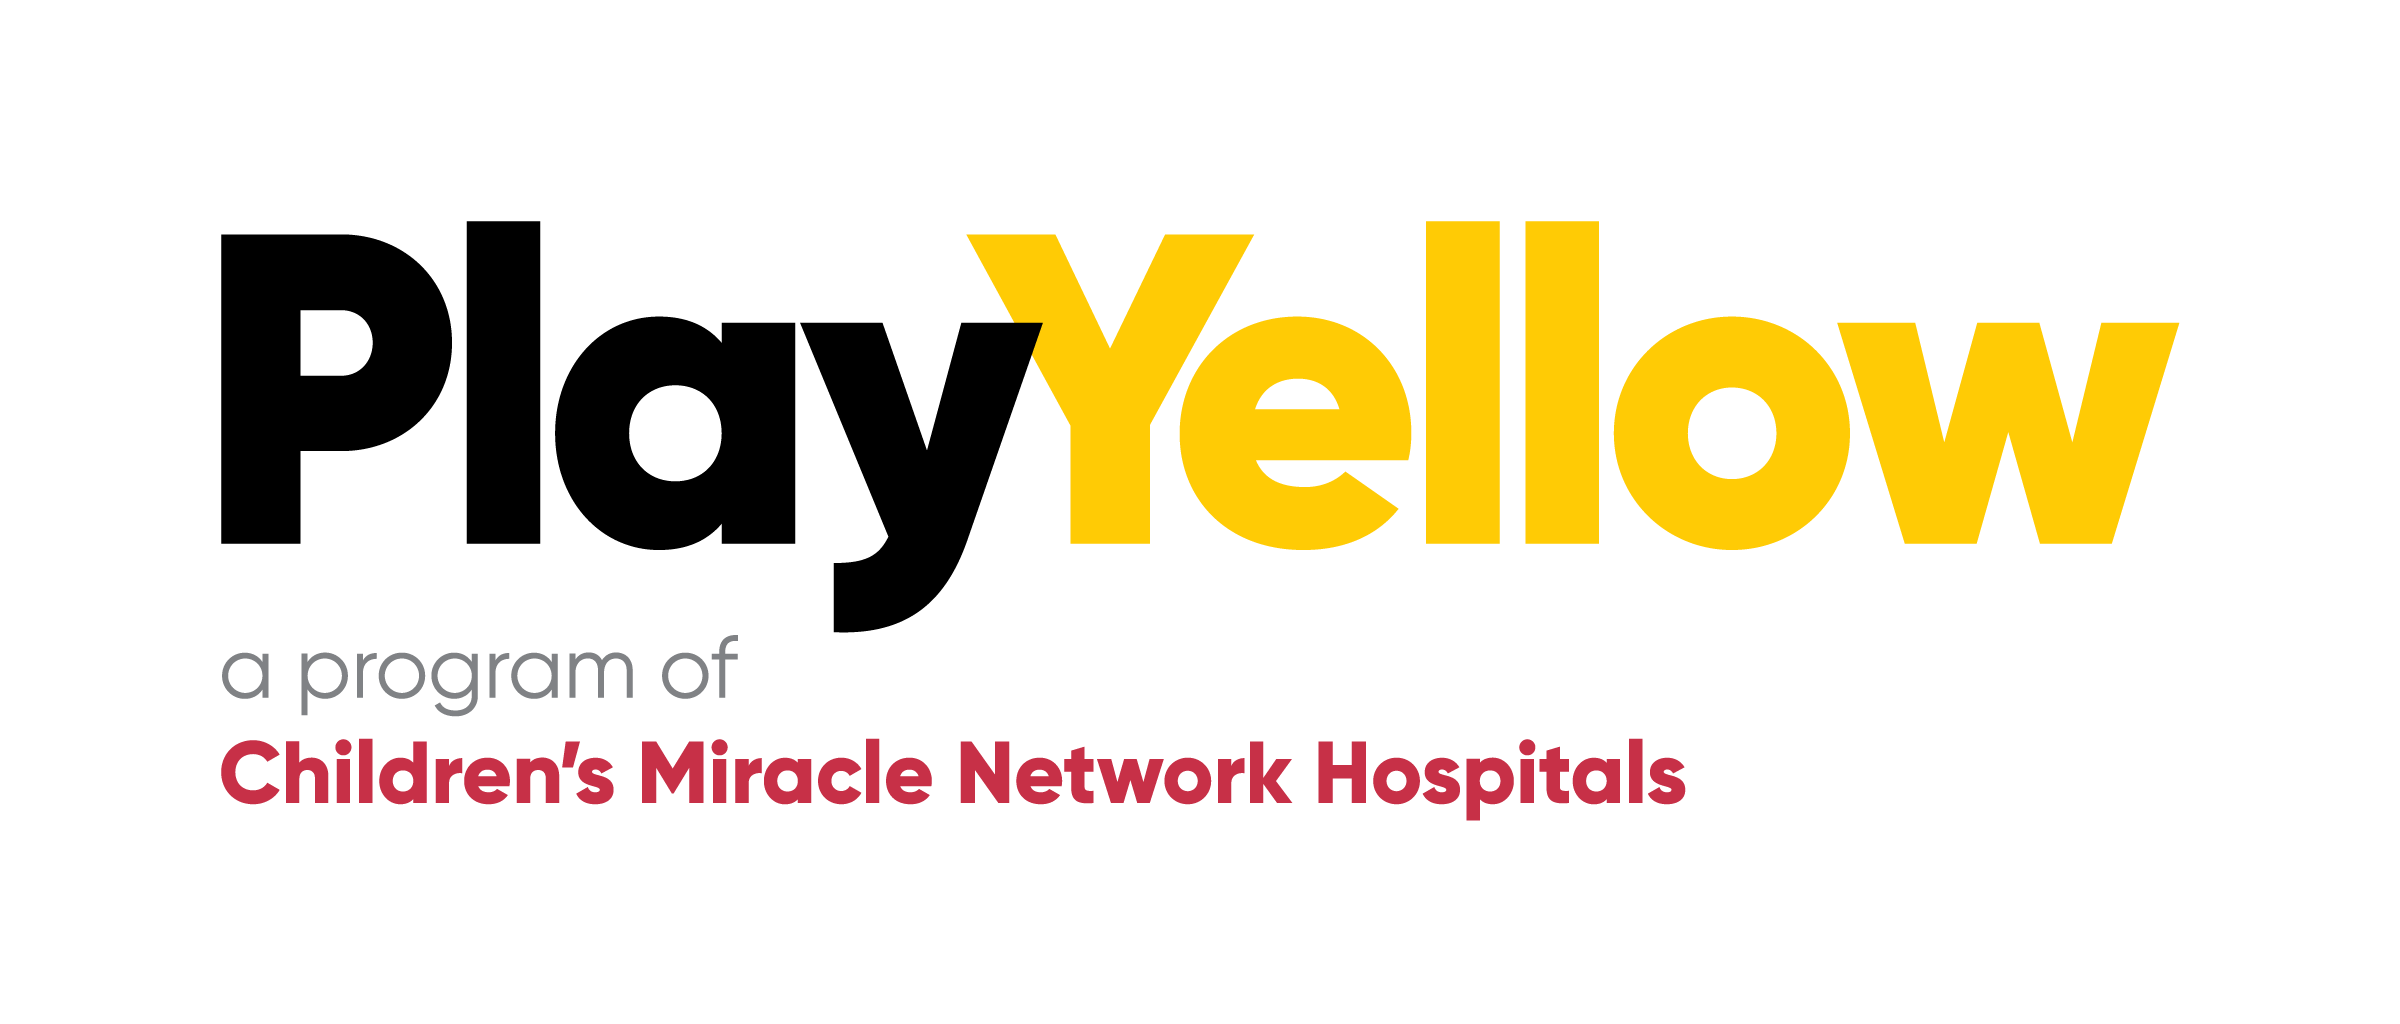 Play Yellow - a program of Children's Miracle Network Hospitals